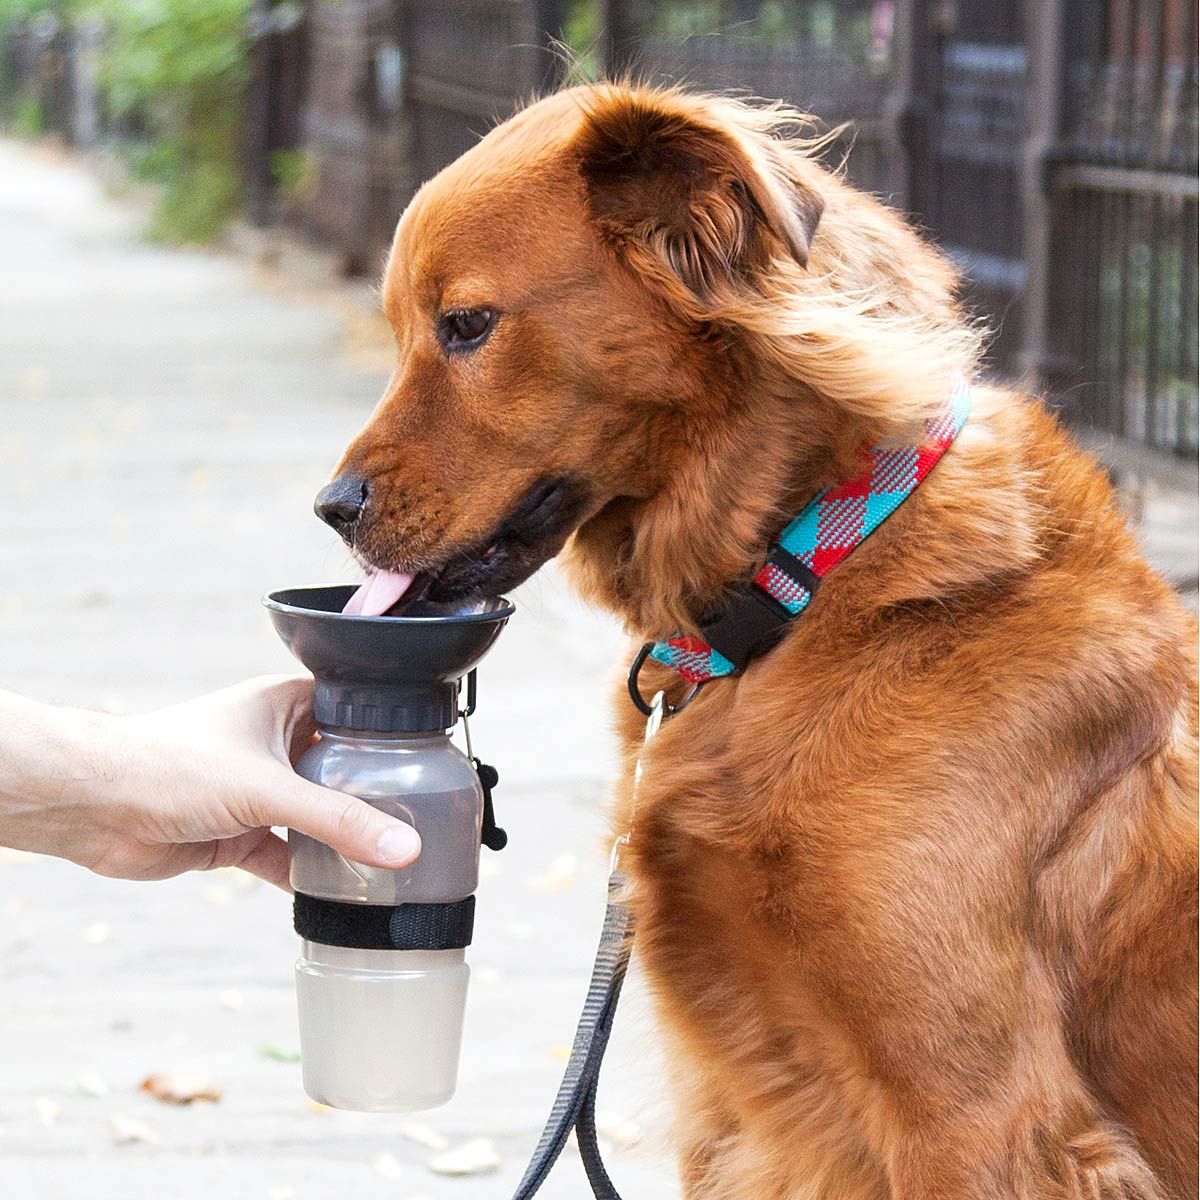 Dog-bowl-water-bottle 10 Unique Luxury Gifts for Dogs That Amaze Everyone